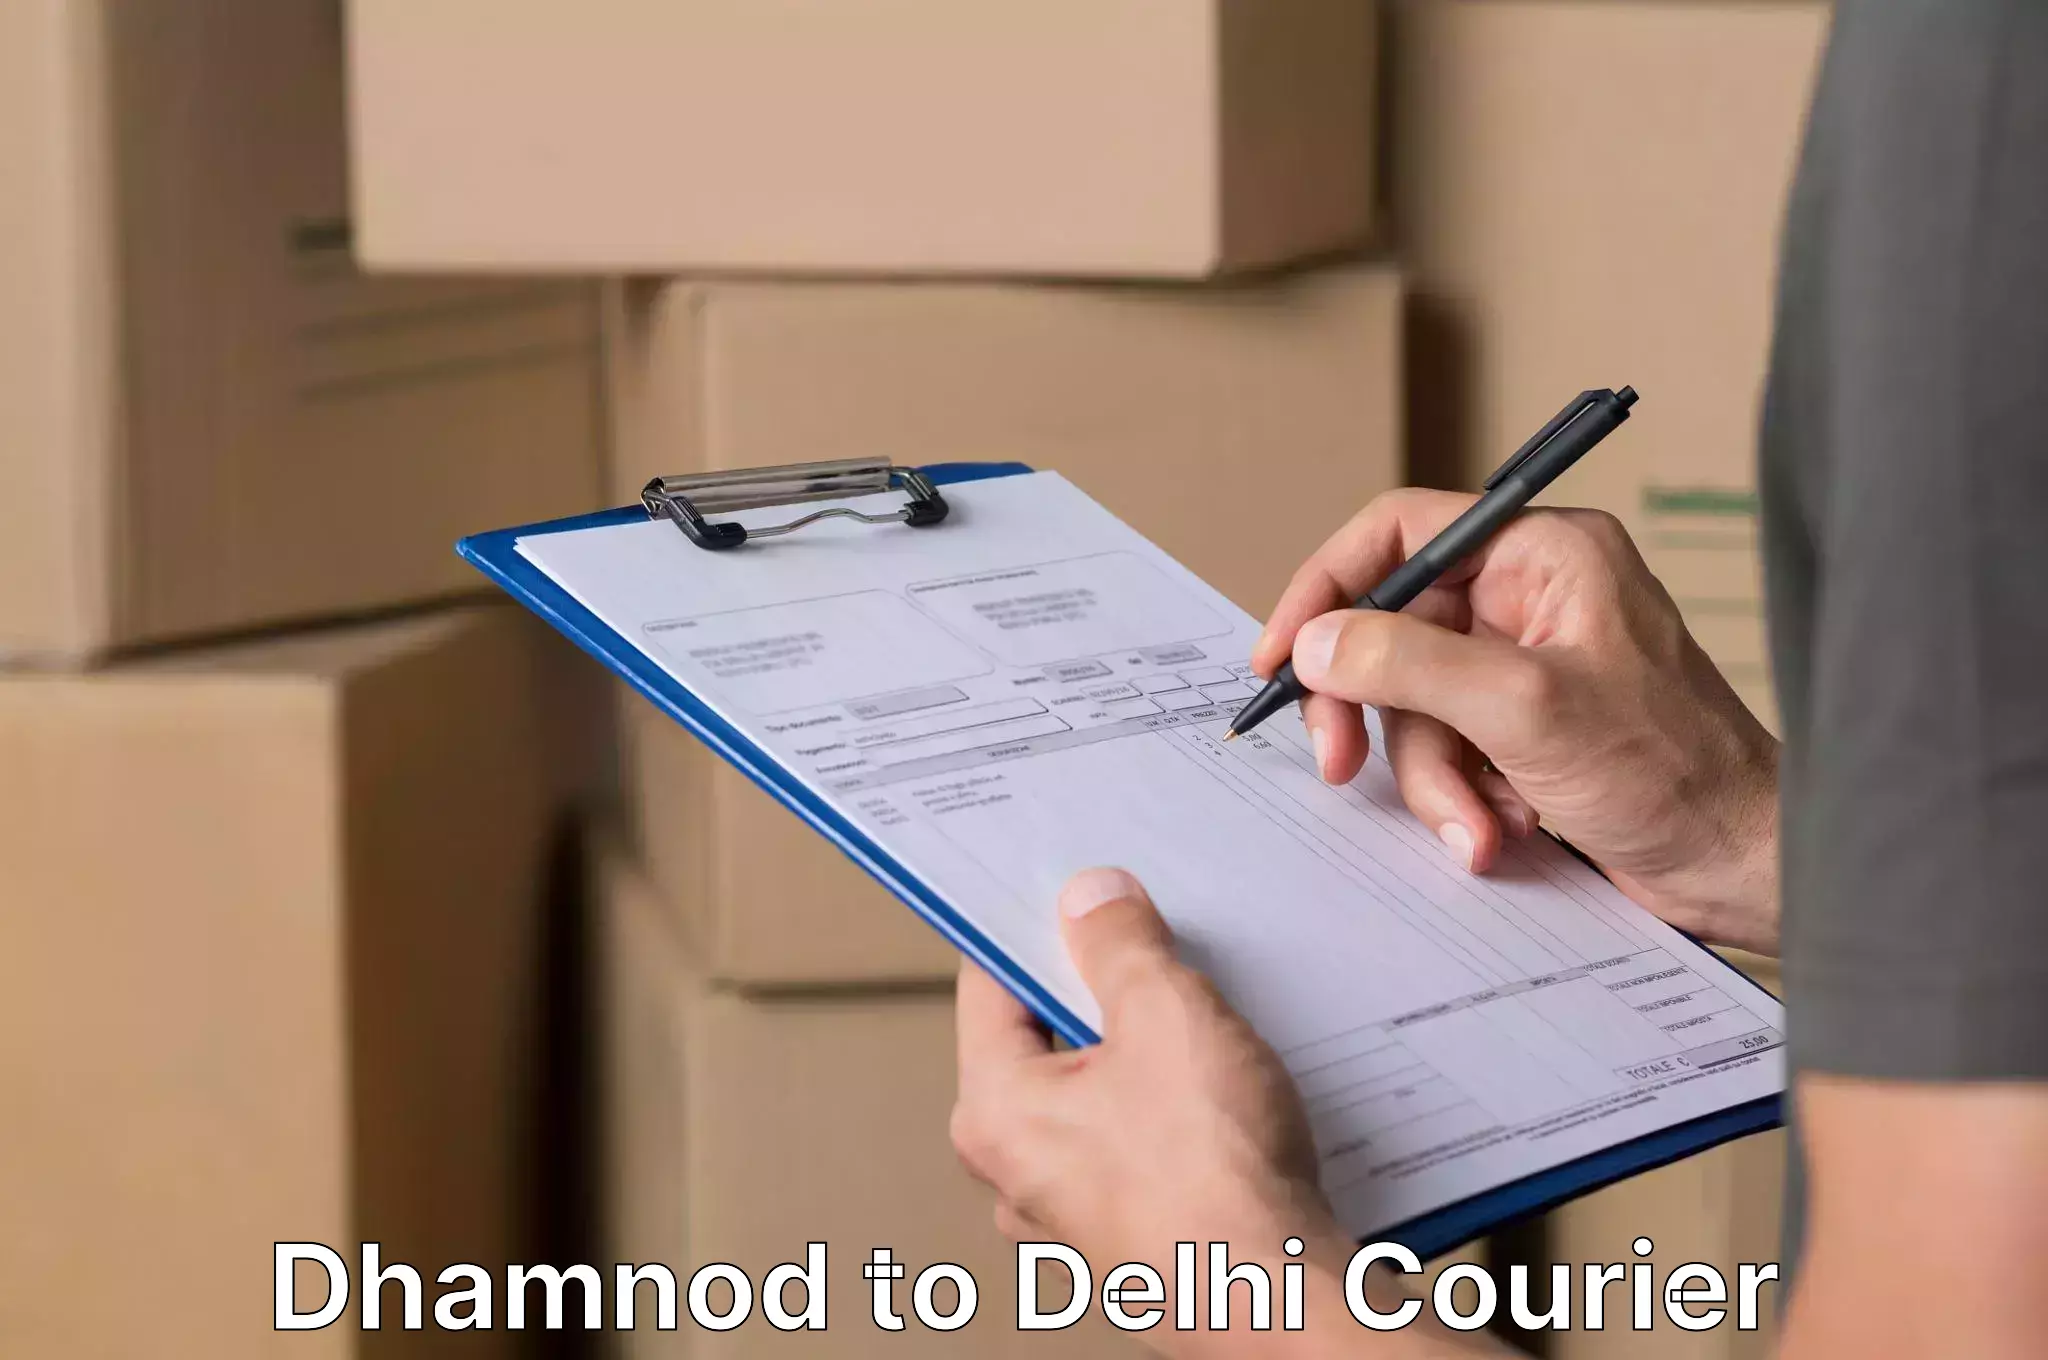 Professional furniture movers Dhamnod to Delhi